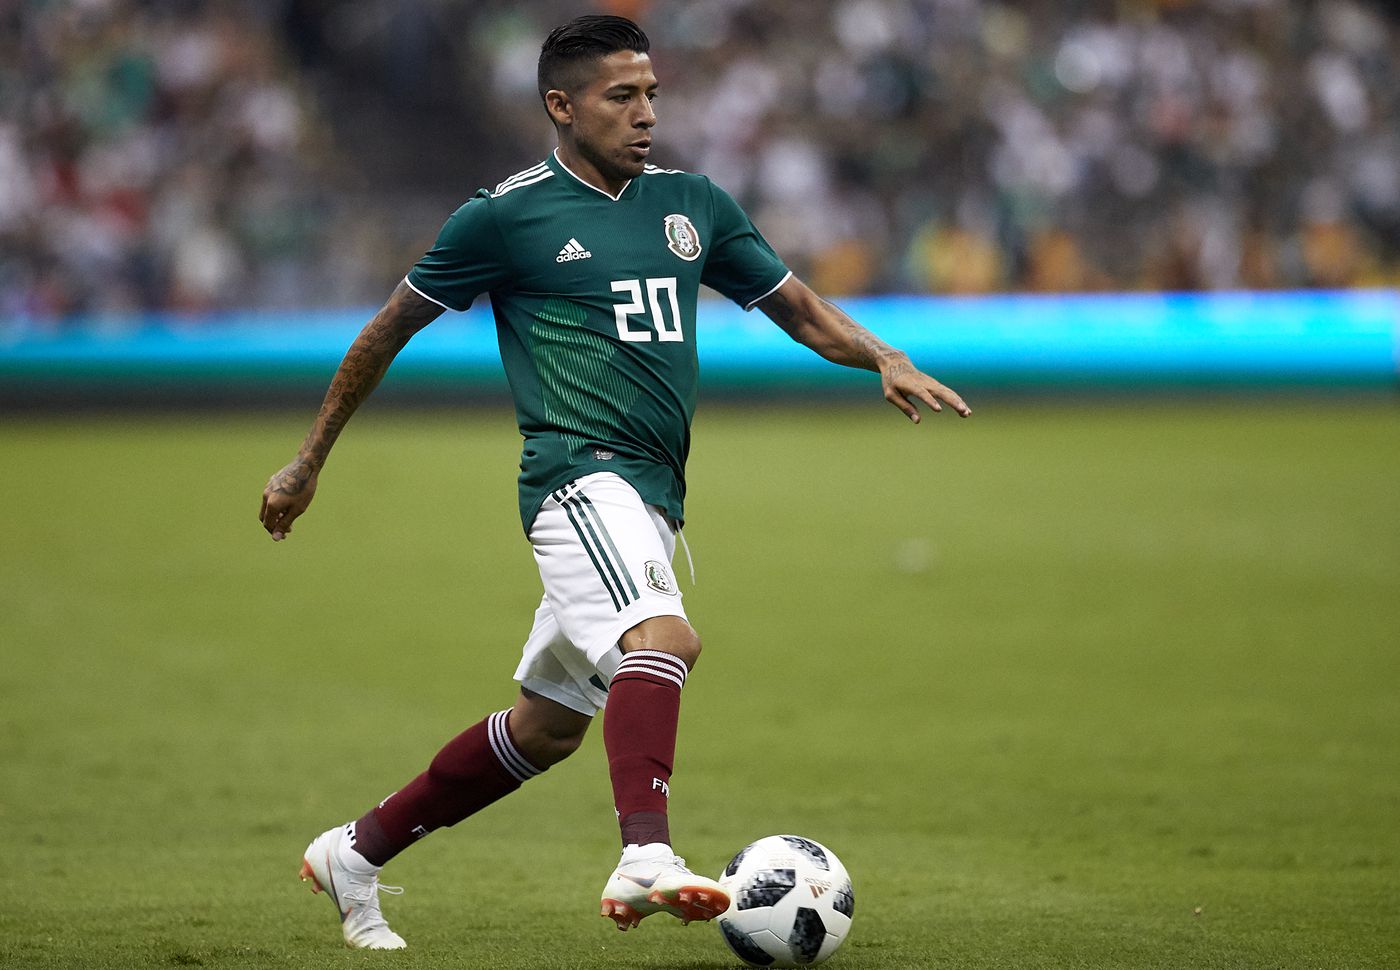 værdighed ensidigt Ko World Cup 2018 Jerseys: Nigeria, Mexico, and More, Ranked - Racked